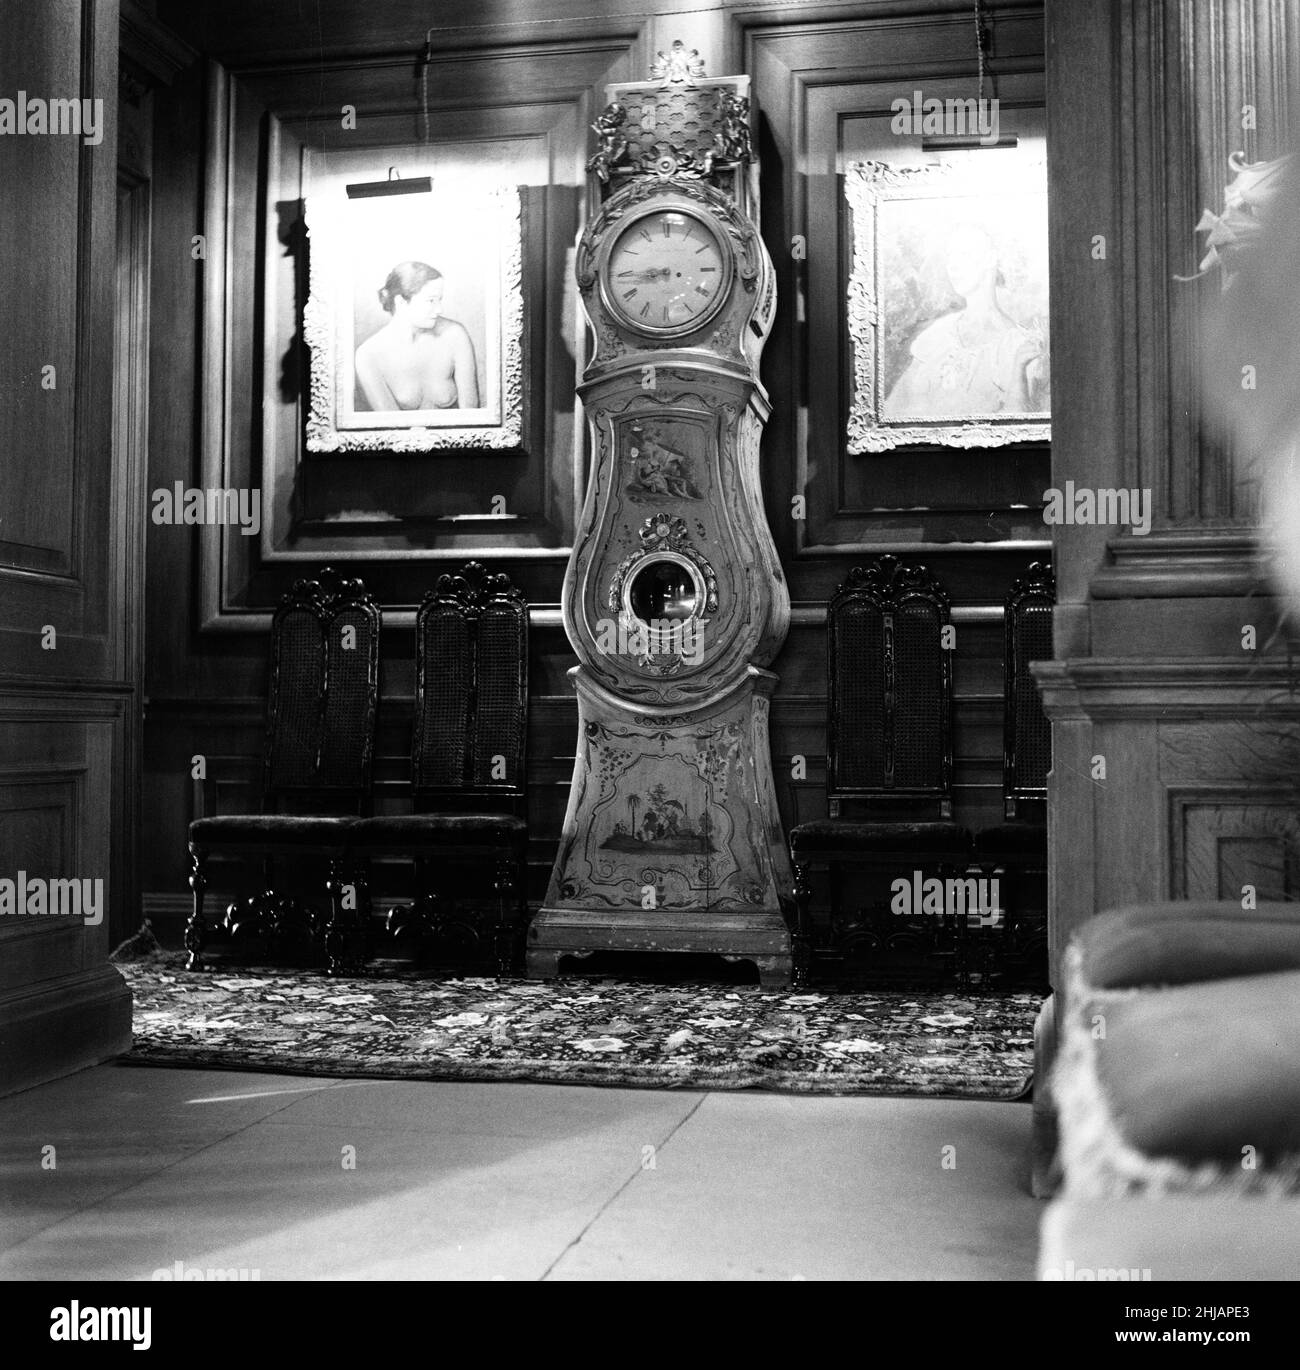 Grandfather Clock, Cliveden House, Taplow, Buckinghamshire, England, 5th July 1963. Home of Lord and Lady Astor. The house was donated to the National Trust in 1942, by Lord Astor's father, with an endowment of ¿250,000 and with the proviso that the family could continue to live in the house for as long as they wished. The Astors ceased to live at Cliveden in 1968, shortly after the Profumo Affair and Bill Astor's death. In 1961, John Profumo met Christine Keeler, at a house party at Cliveden. Stock Photo